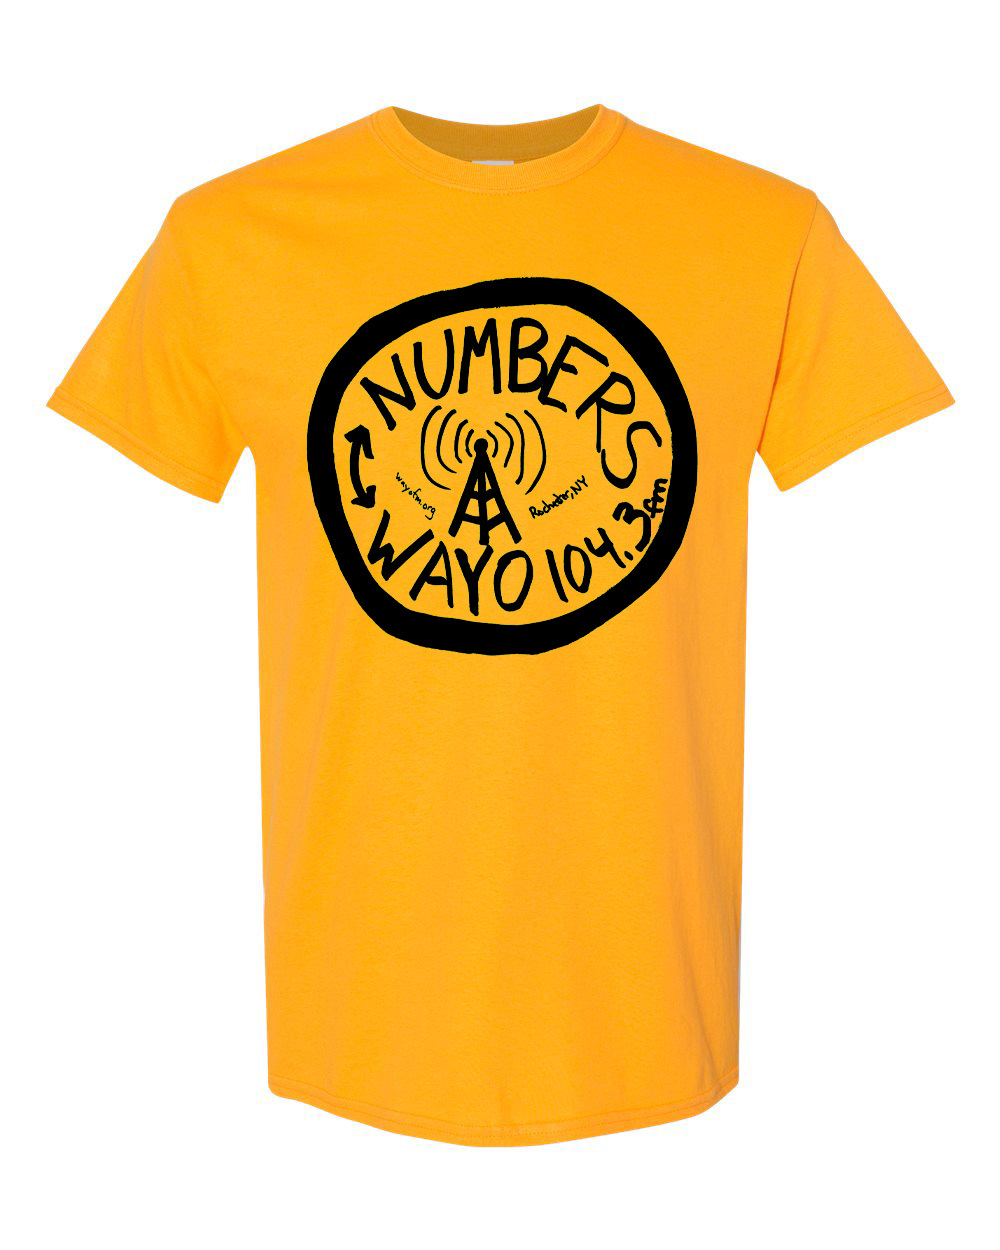 Number t-shirt